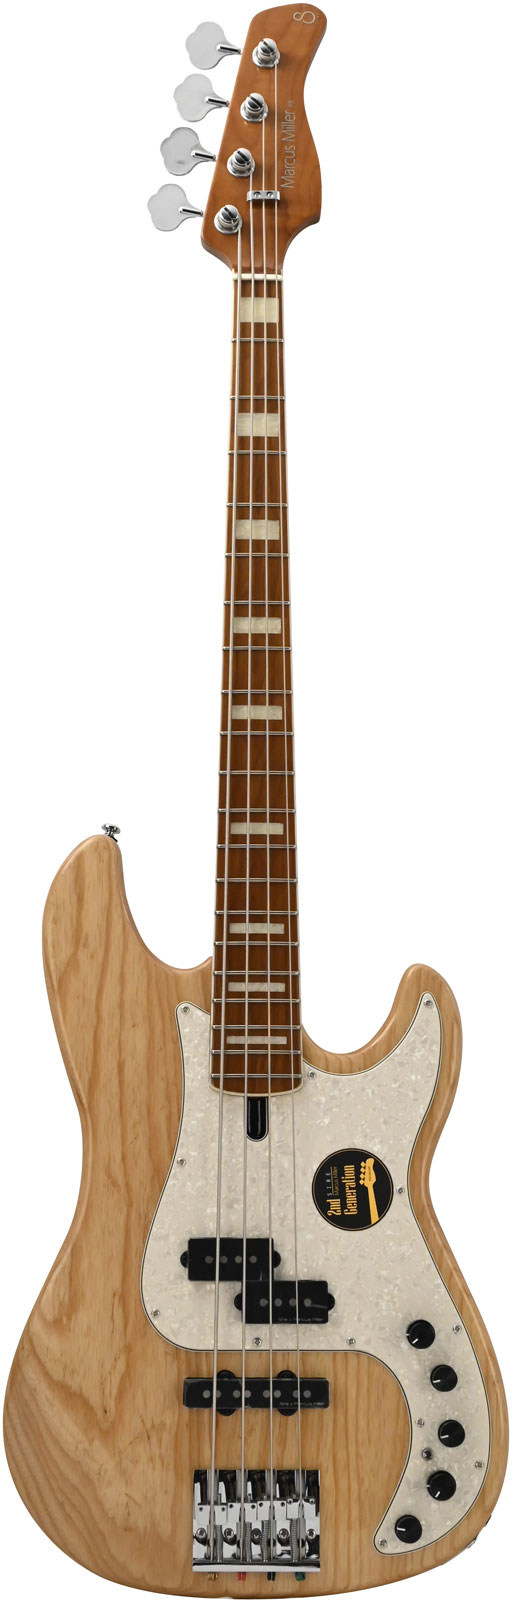 SIRE MARCUS MILLER P8 SWAMP ASH-4 NT MN + HOUSSE